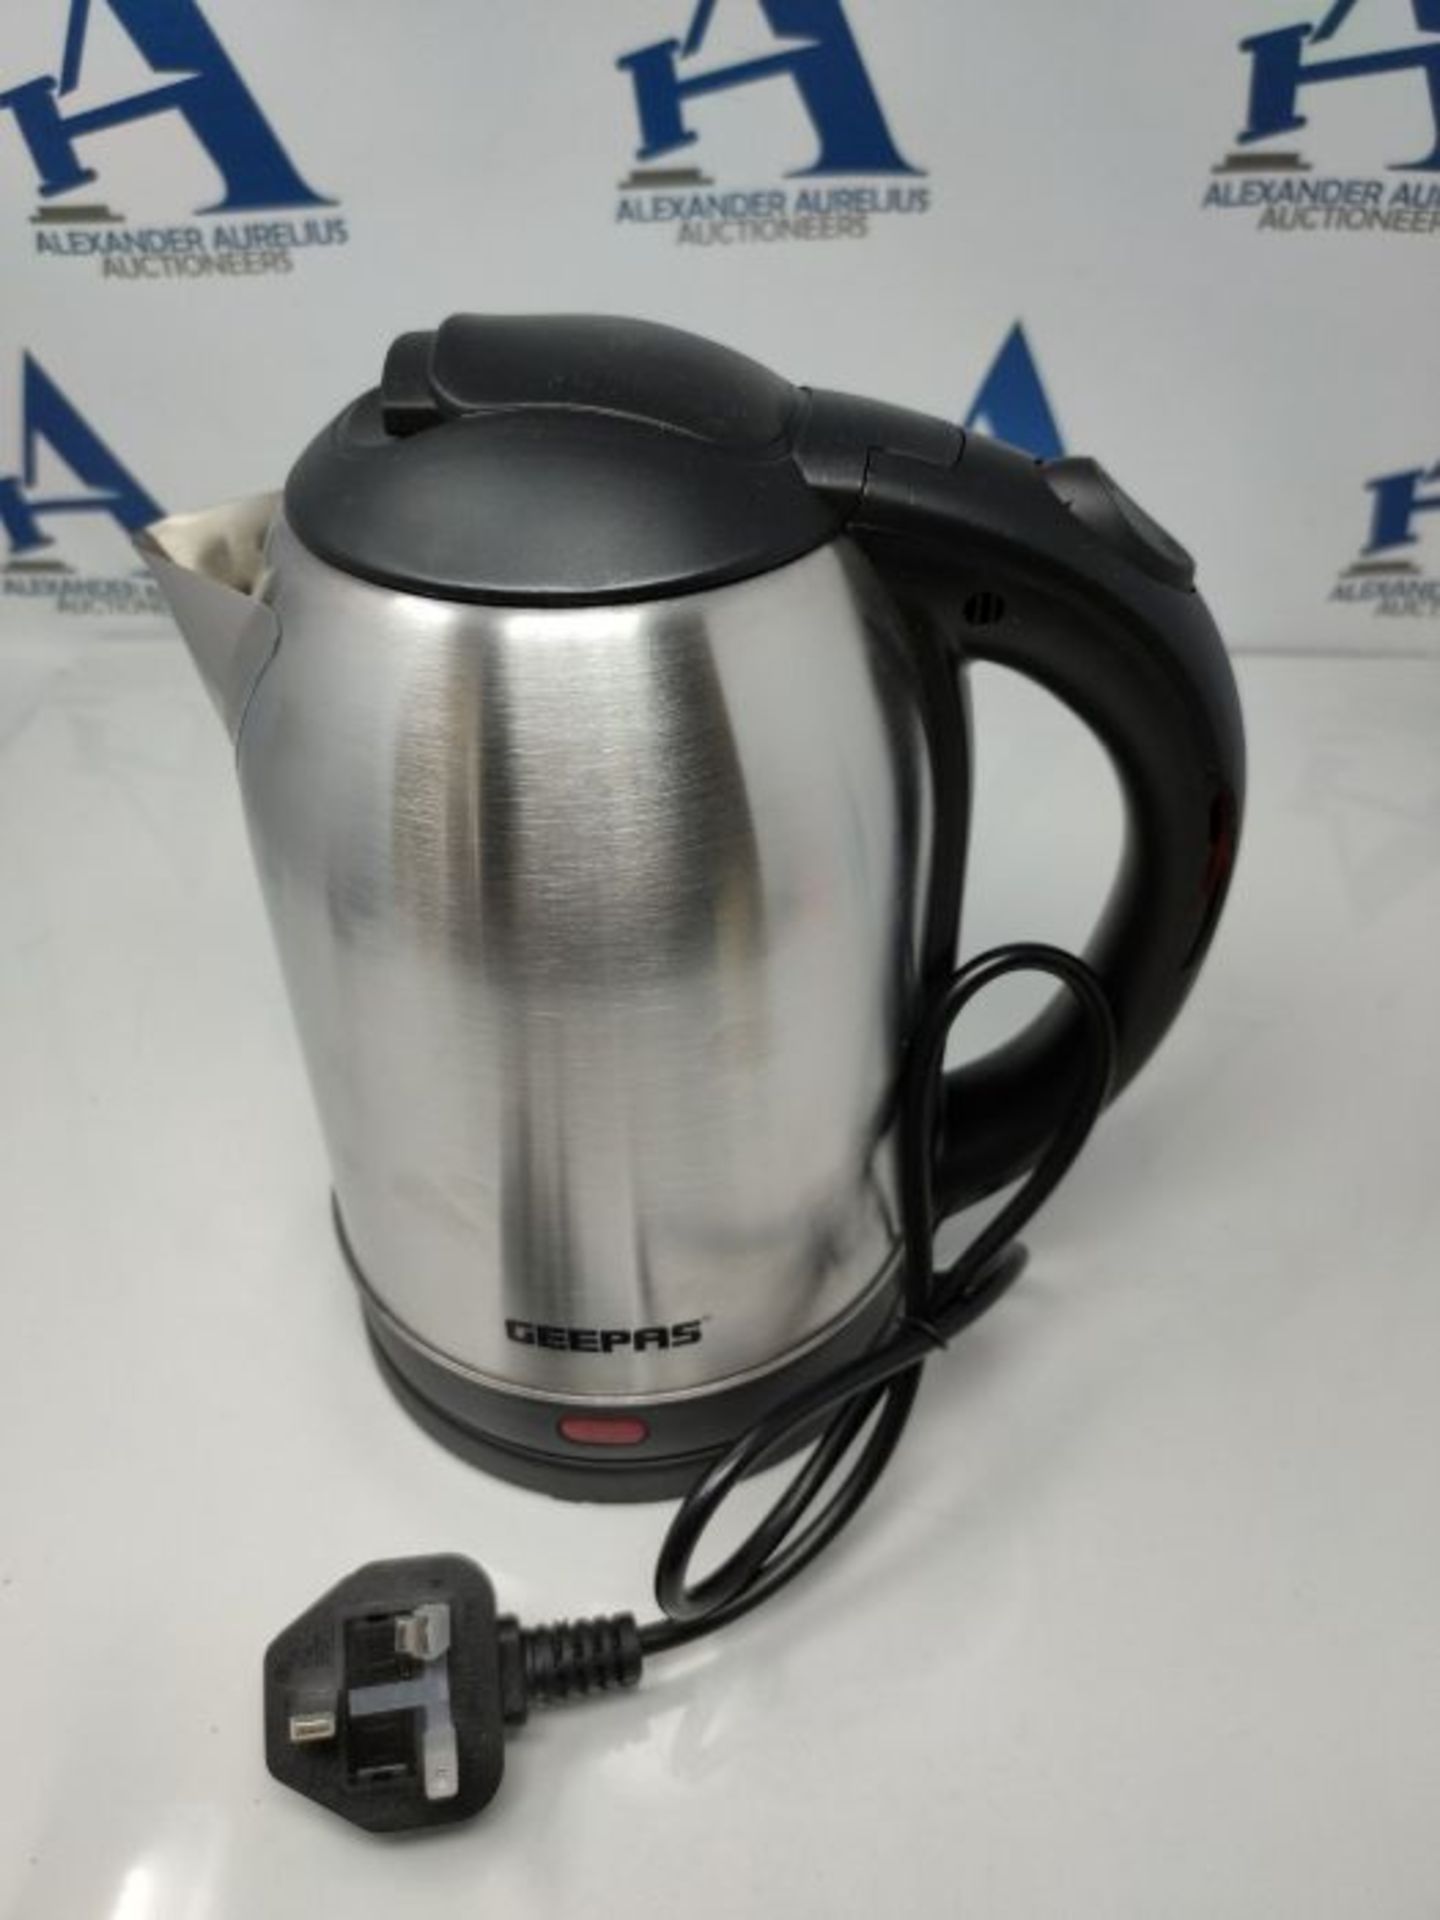 Geepas Electric Kettle, 1500W | Stainless Steel Cordless Kettle | Boil Dry Protection - Image 3 of 3